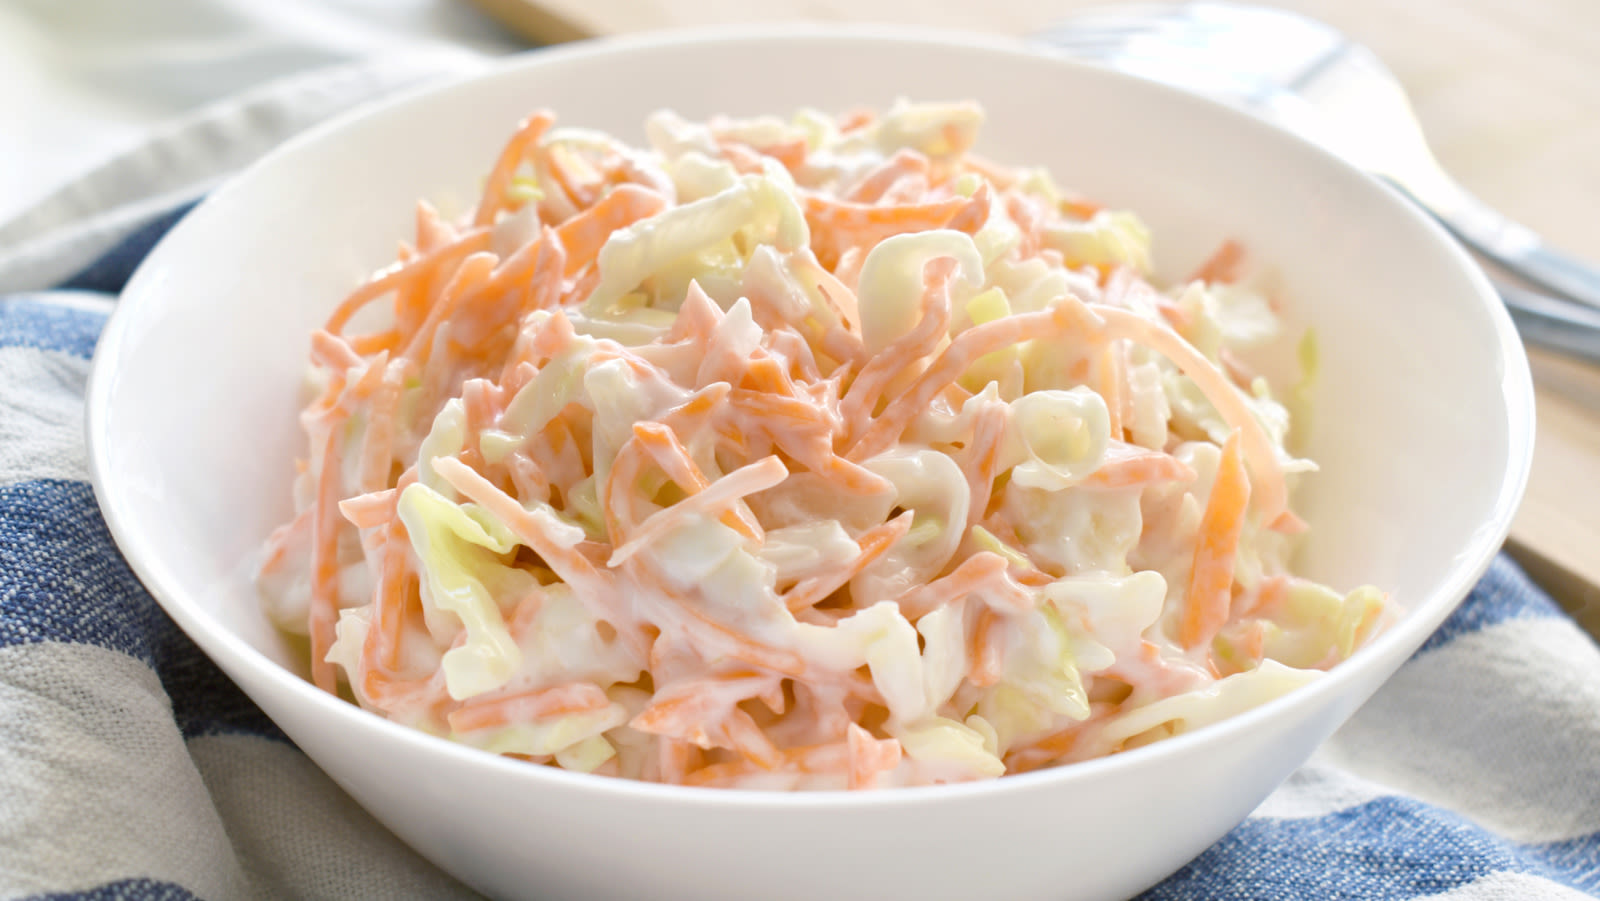 Red Onion Is The Ingredient You're Missing For Even Better Coleslaw